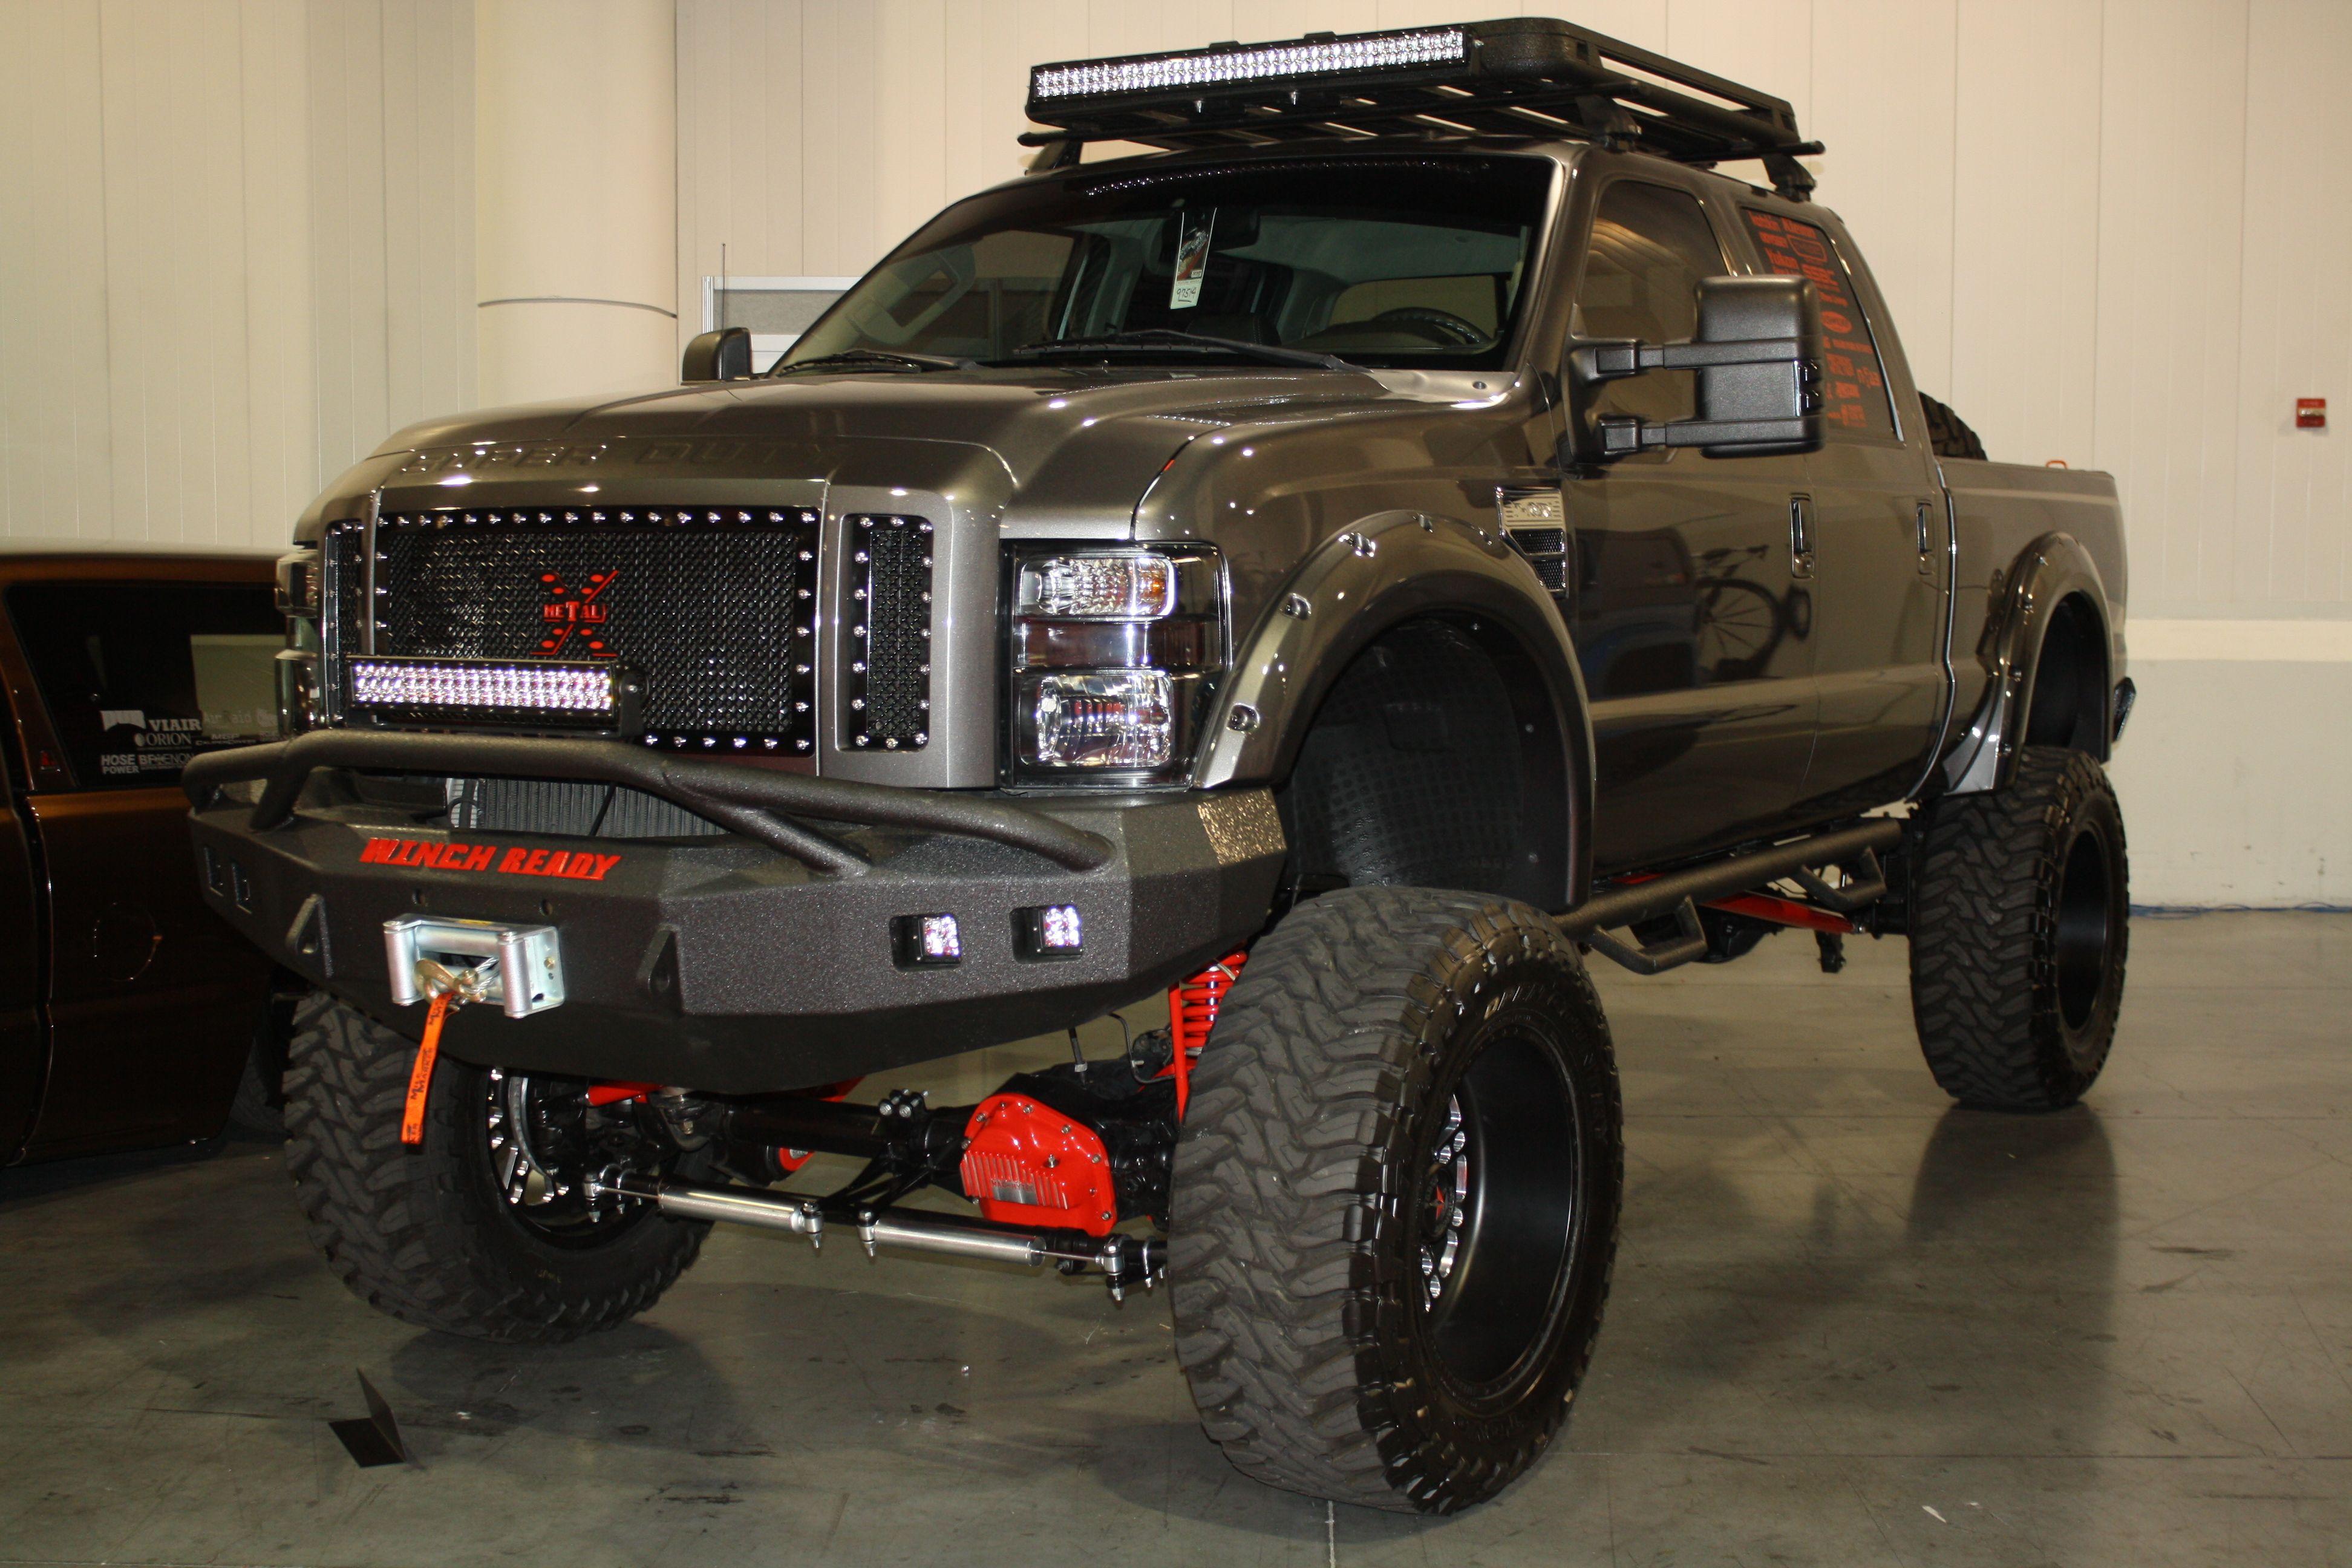 Lifted Gmc Truck Wallpapers Image Gallery.